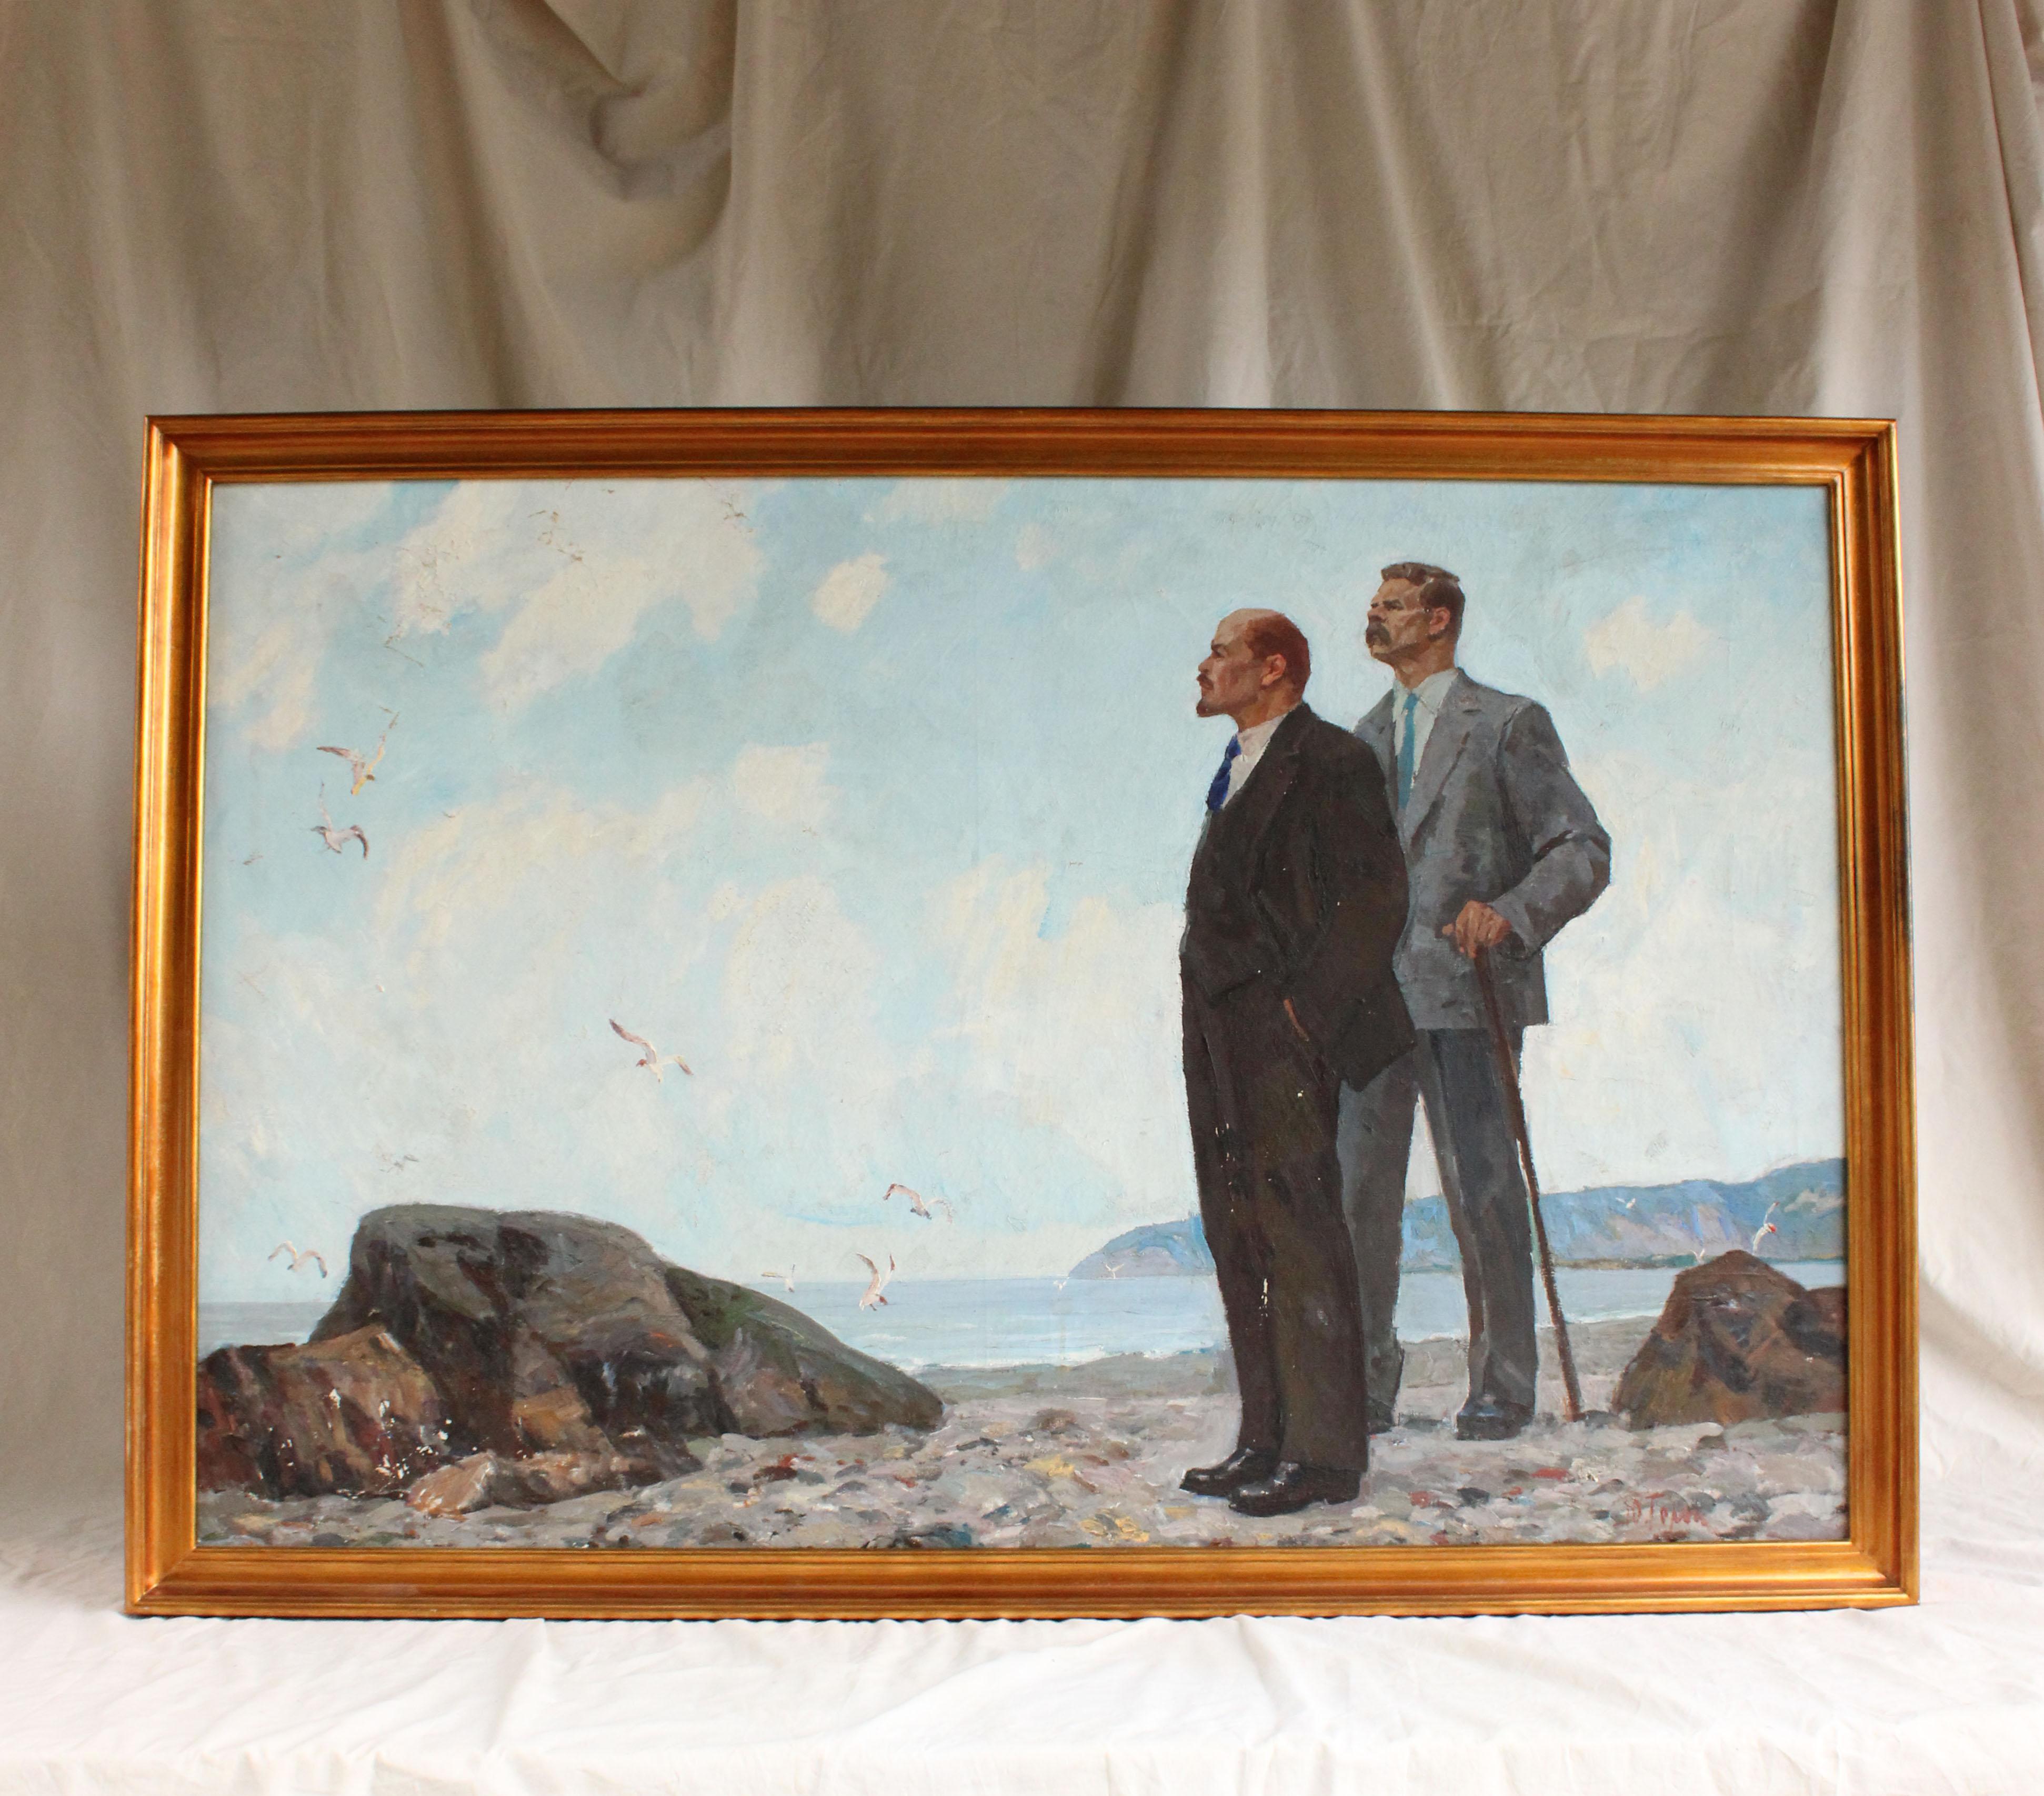 Lenin and Gorky on Capri (1908)
Socialist Realism
Oil on canvas, signed
Engraved and gilded frame
Rare painting depicting the celebrated meeting between Russian writer Maximo Gorky and his friend Lenin on the island of Capri.